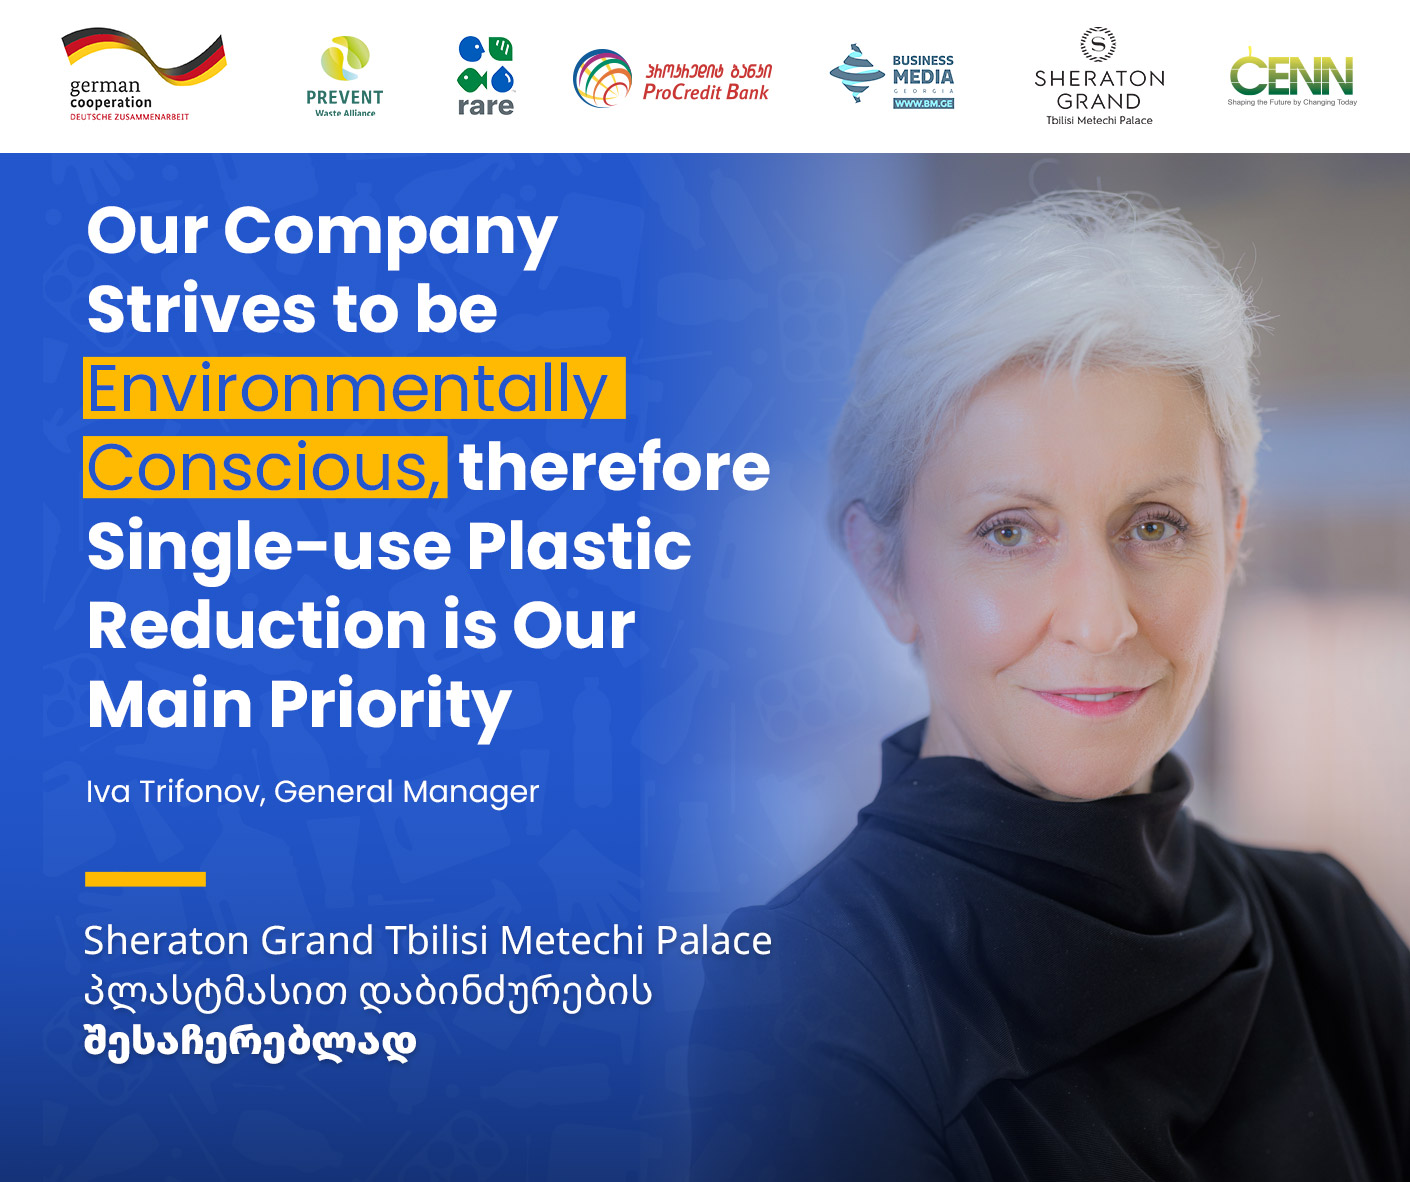 Introducing “Sheraton Grand Tbilisi Metechi Palace Hotel”, a participant of the Beat Plastic Pollution competition